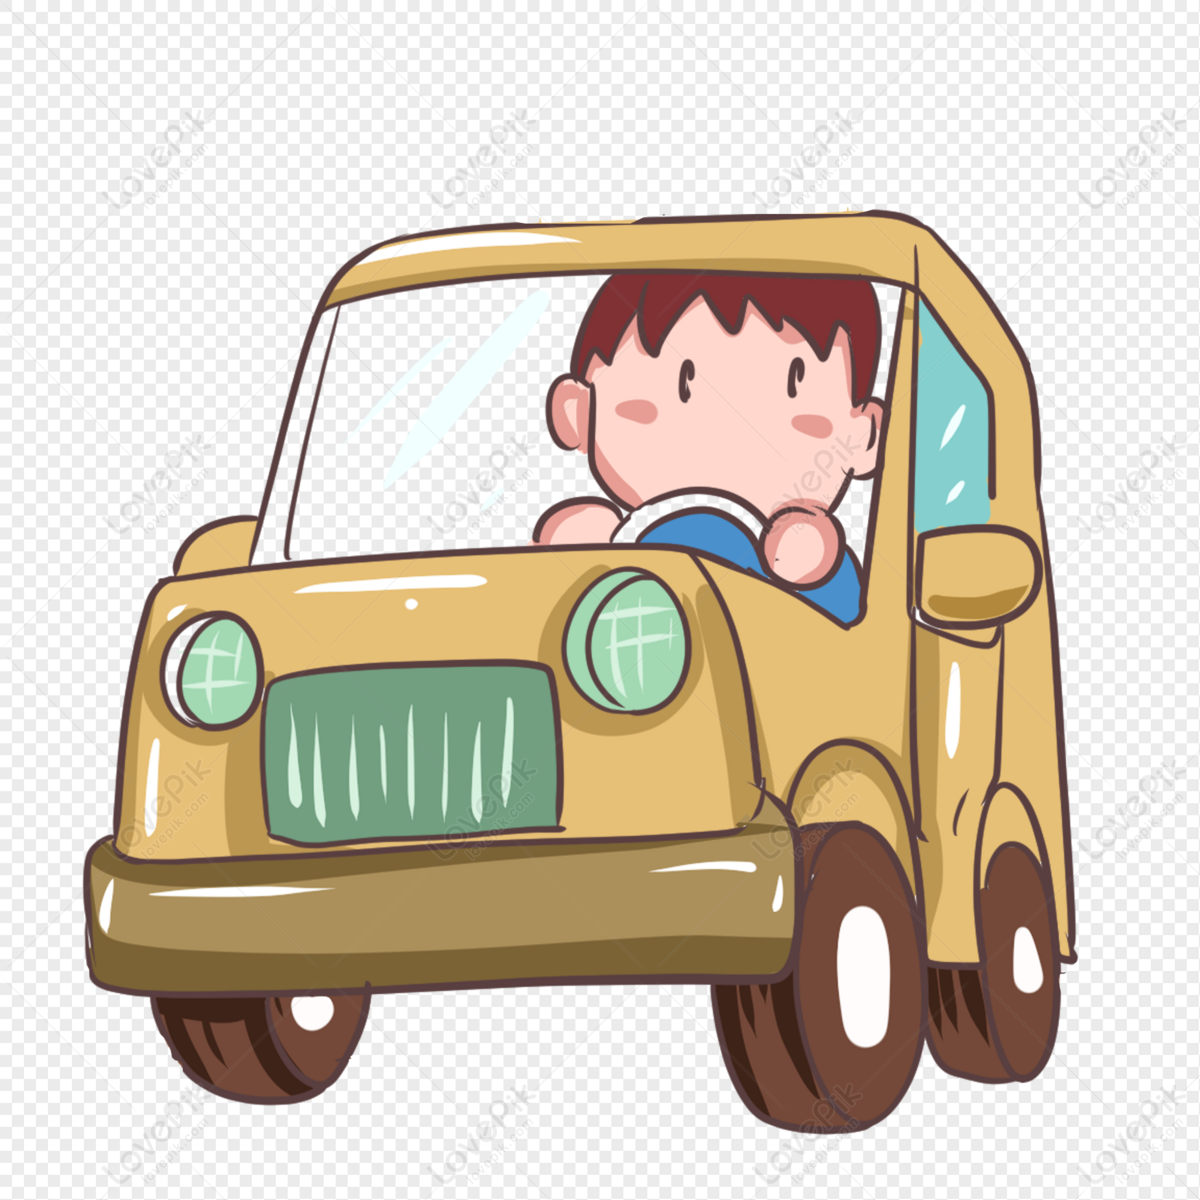 Driving A Car To Work PNG Transparent Background And Clipart Image For Free  Download - Lovepik | 401476270